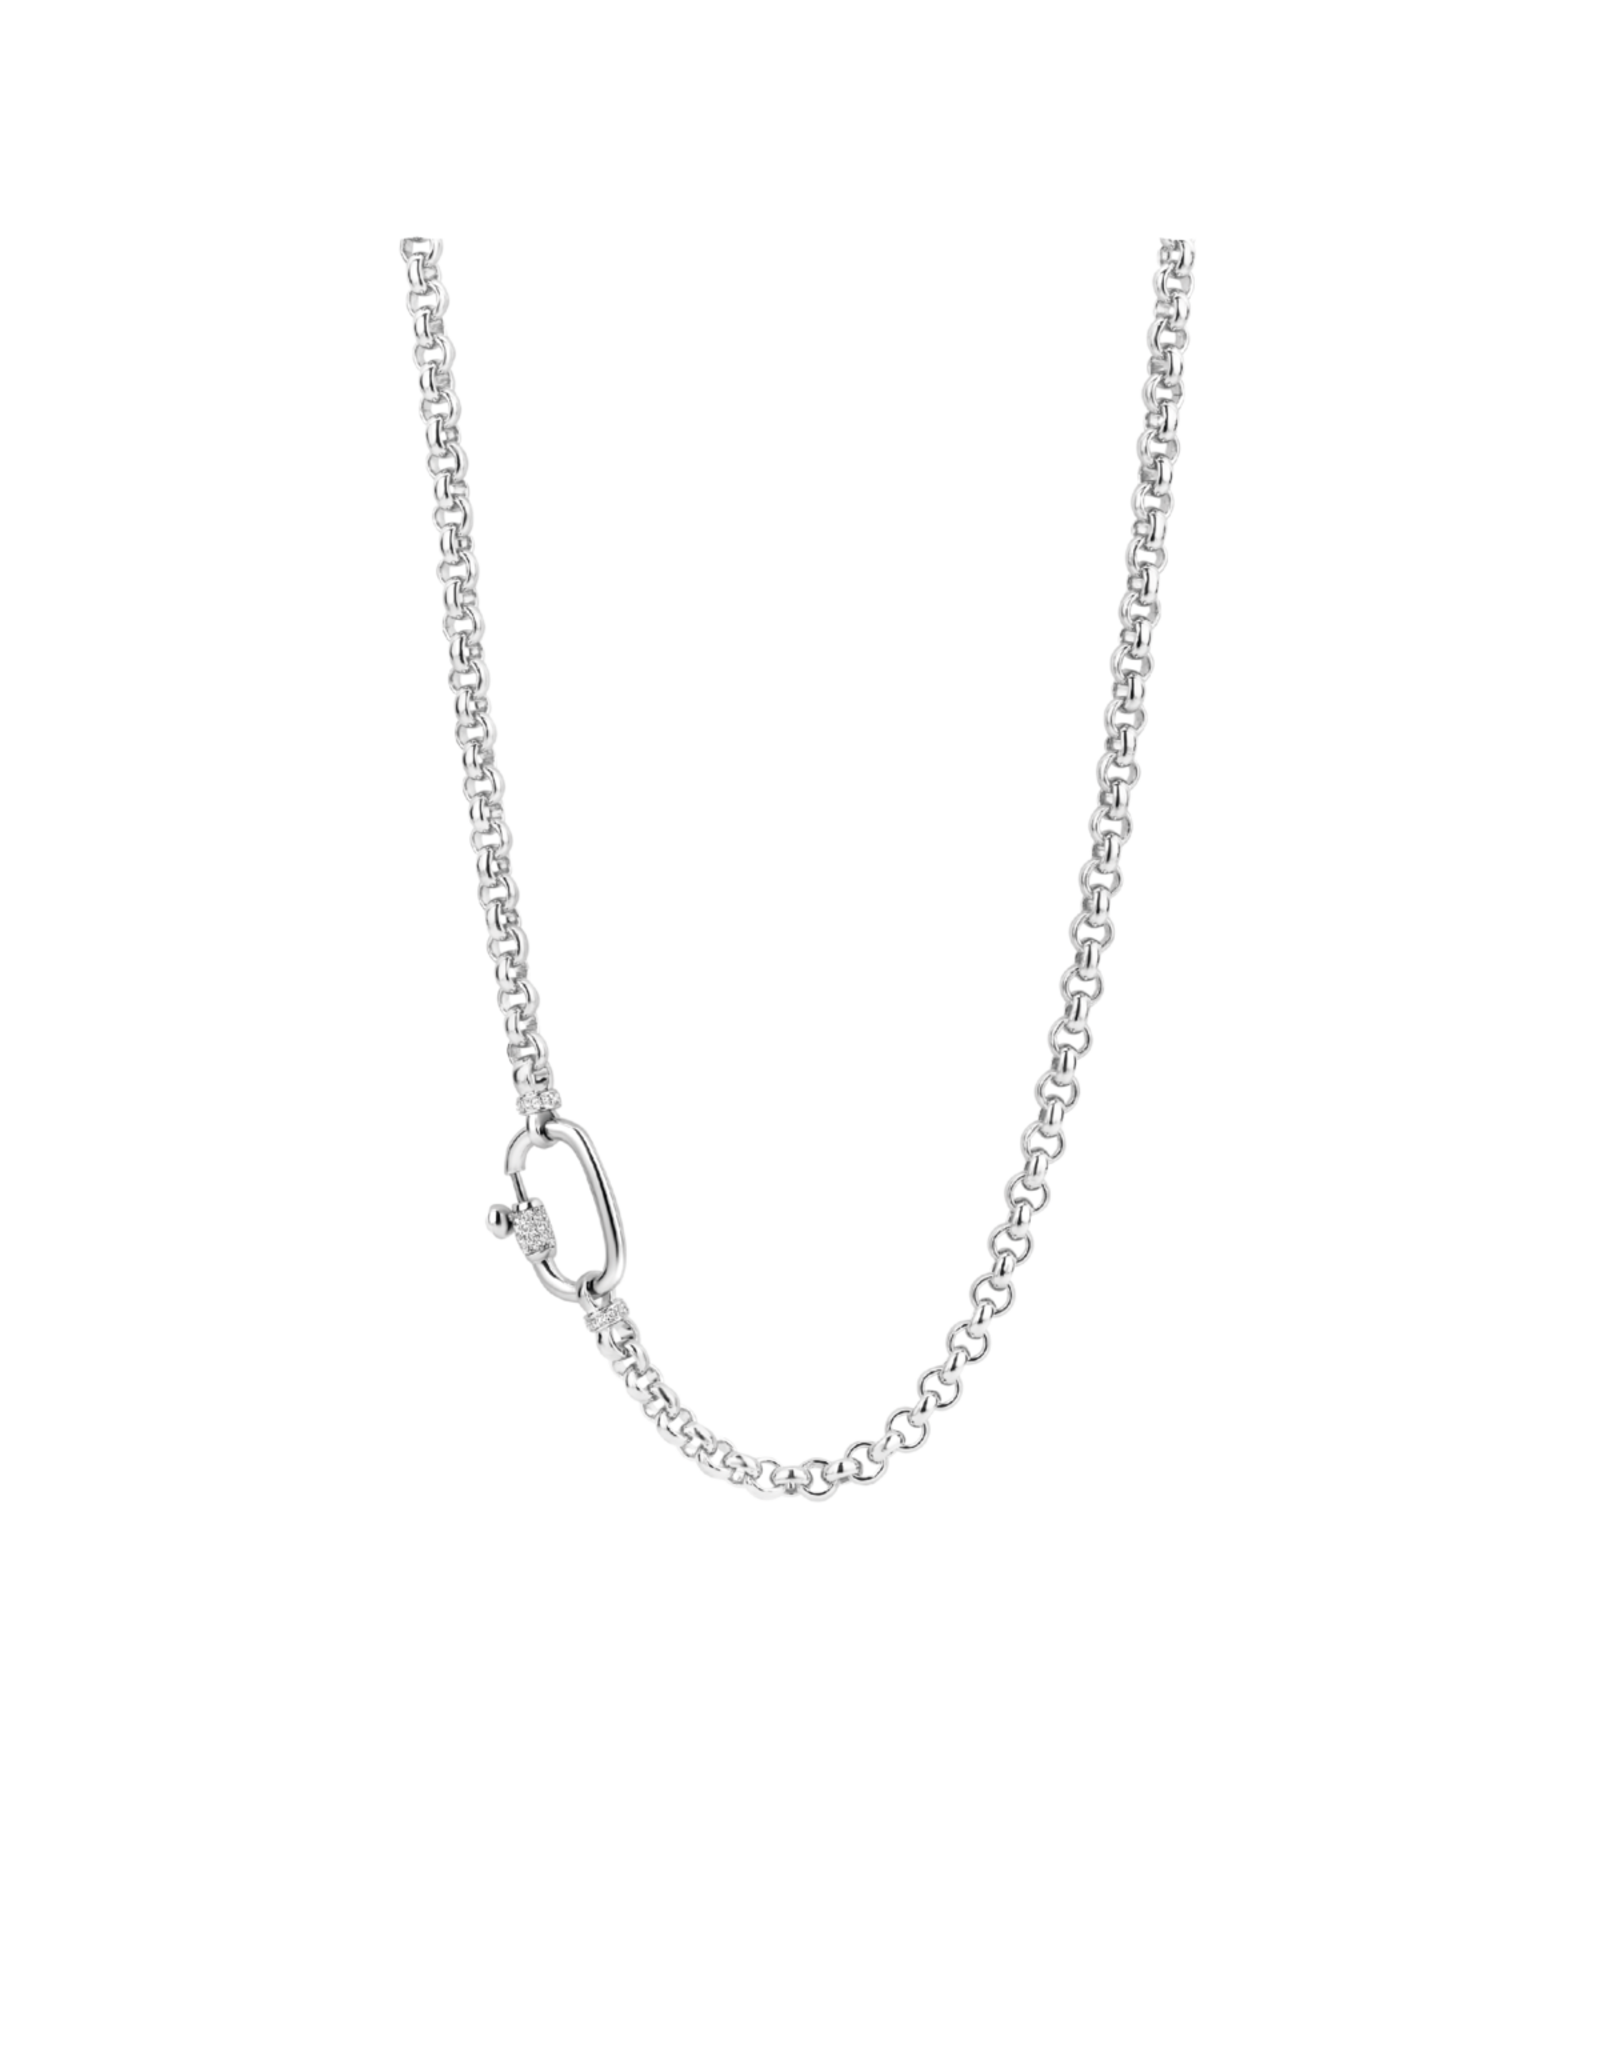 Chunky Silver Rolo Necklace- 3958ZI/48